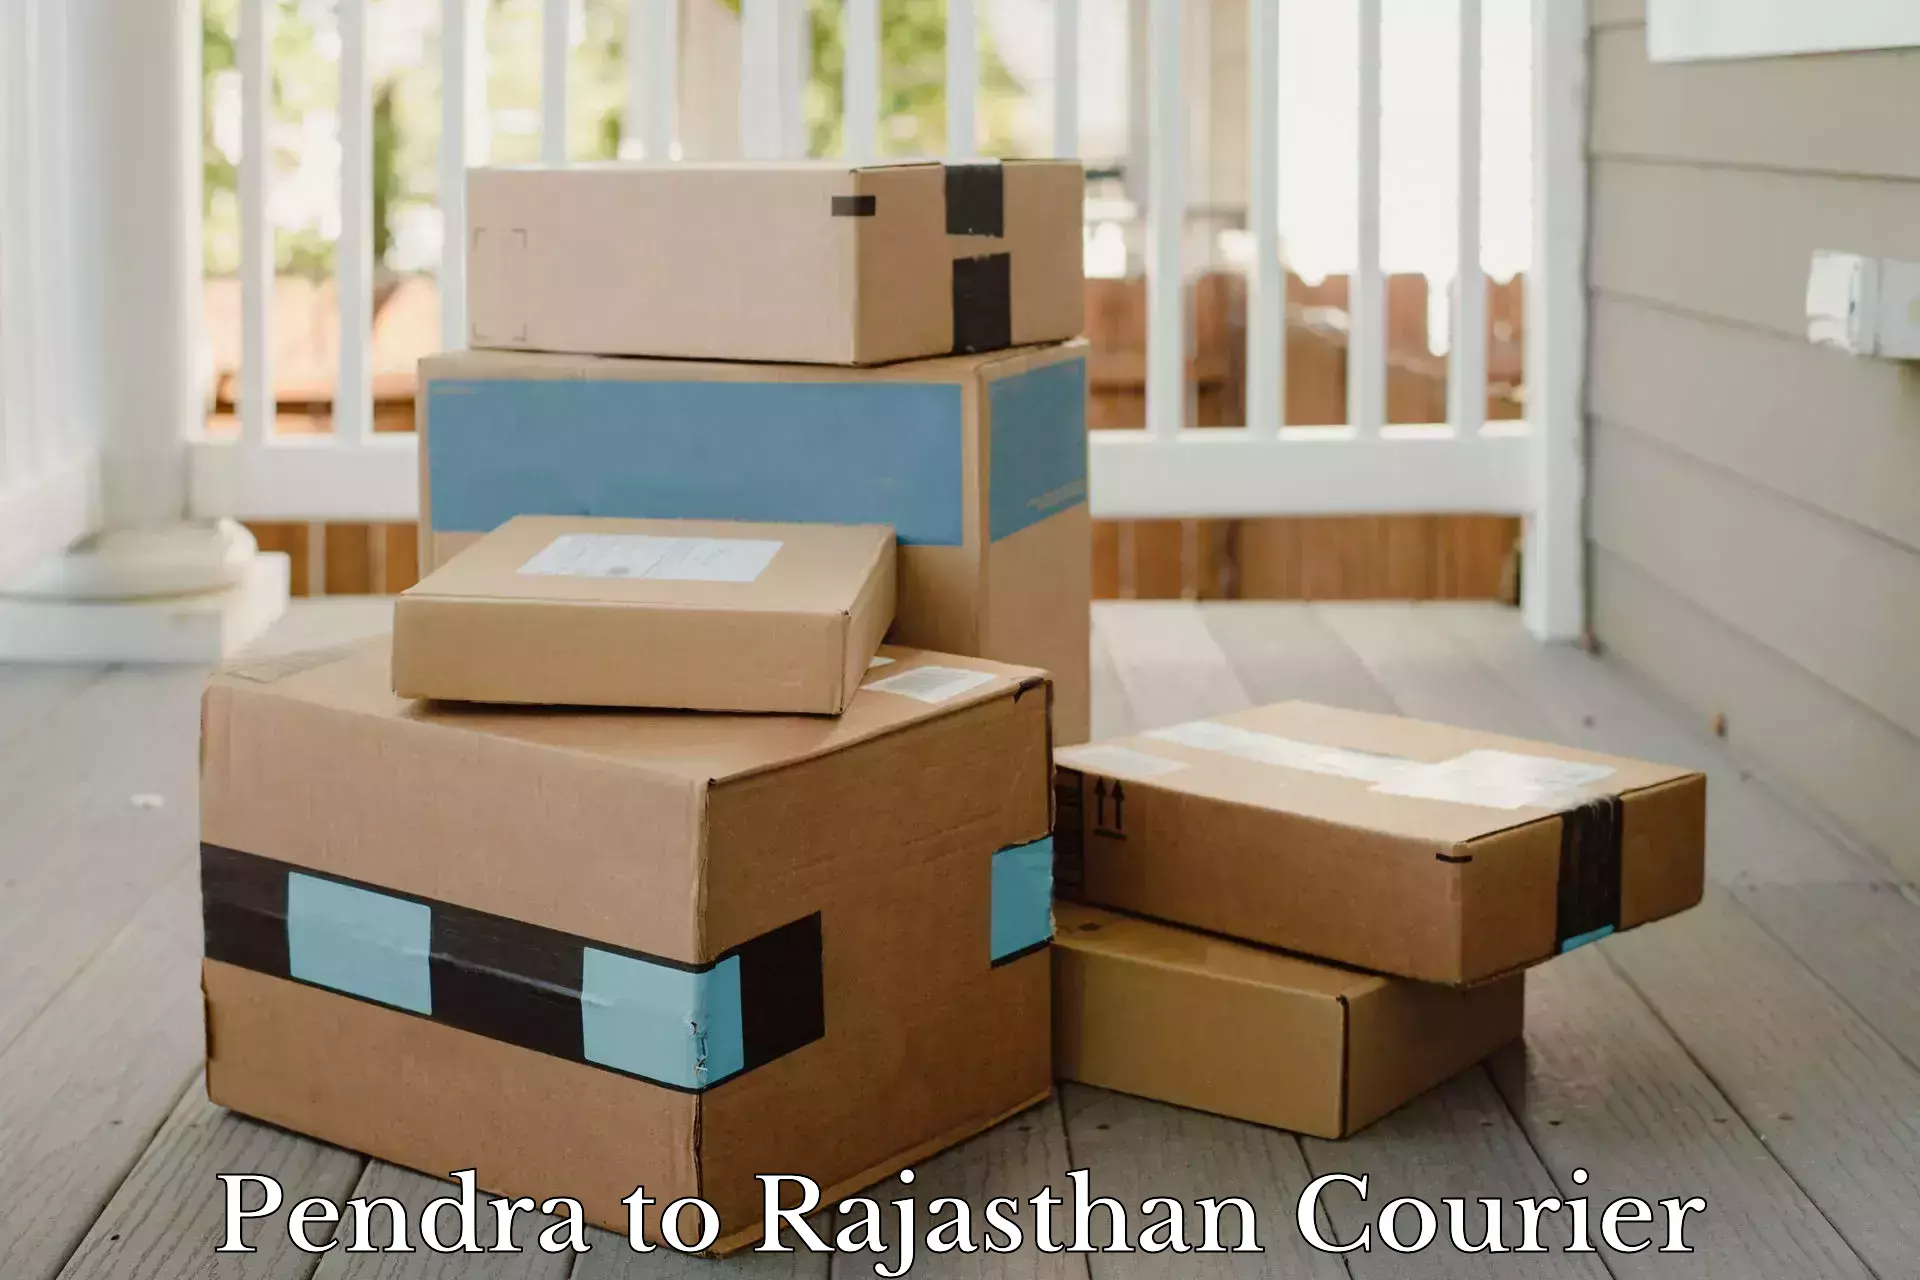 Customer-focused courier Pendra to Yeswanthapur